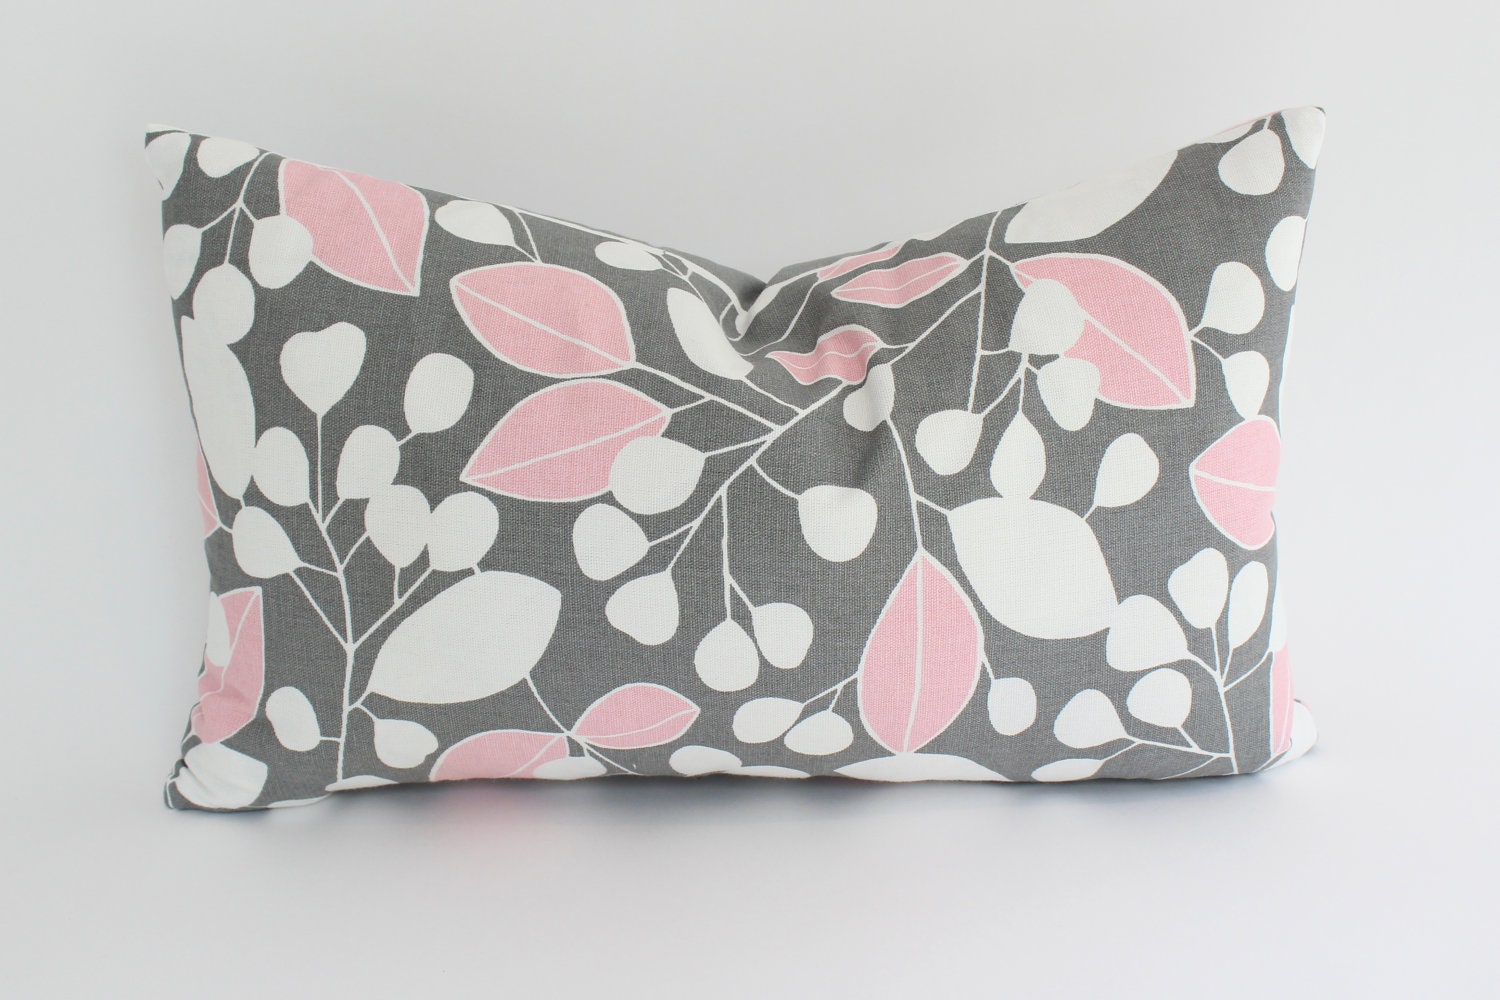 Contemporary Pink and Grey Lumbar Pillow Cover with Leaves and Stripes - ThePillowStudioShop